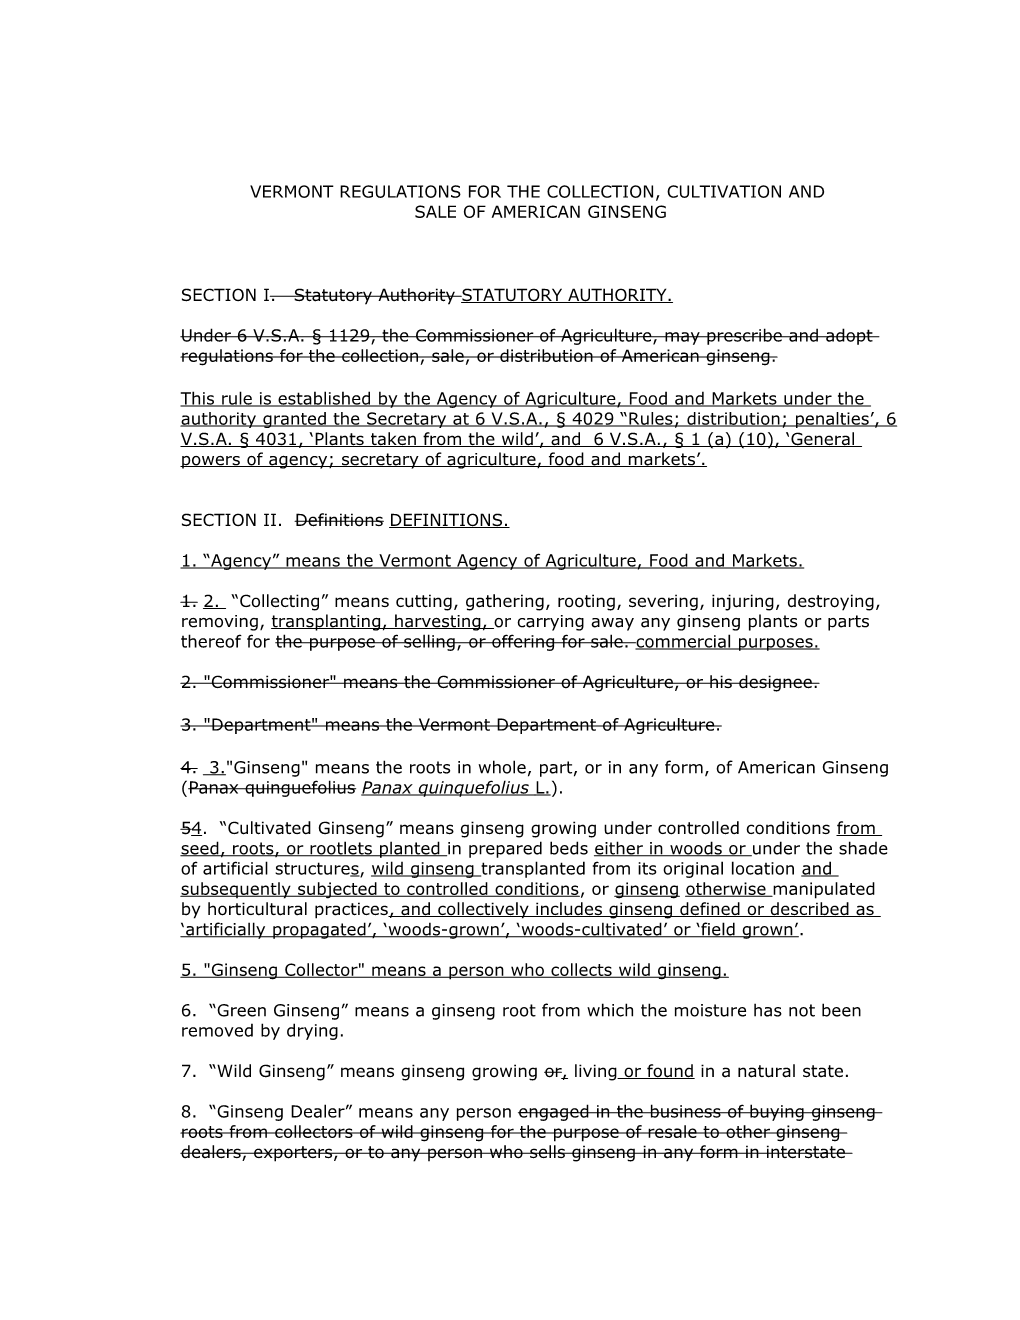 Vermont Regulations for the Collection, Cultivation And